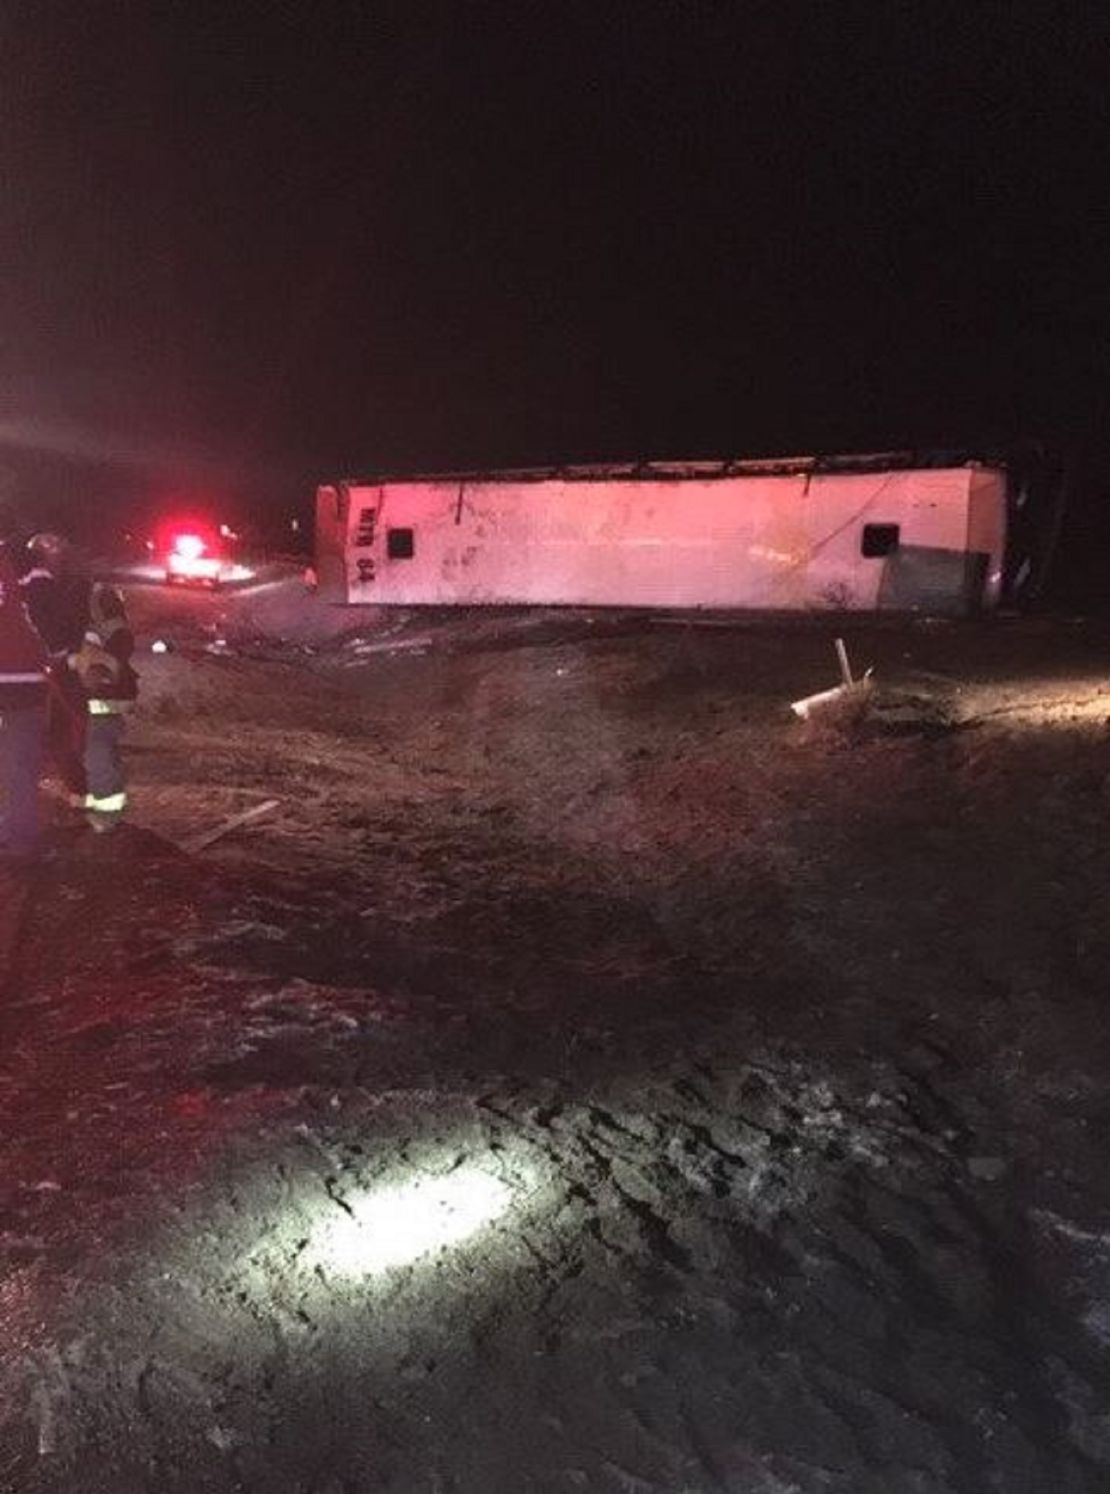 Icy road conditions may have contributed to the crash, police said.